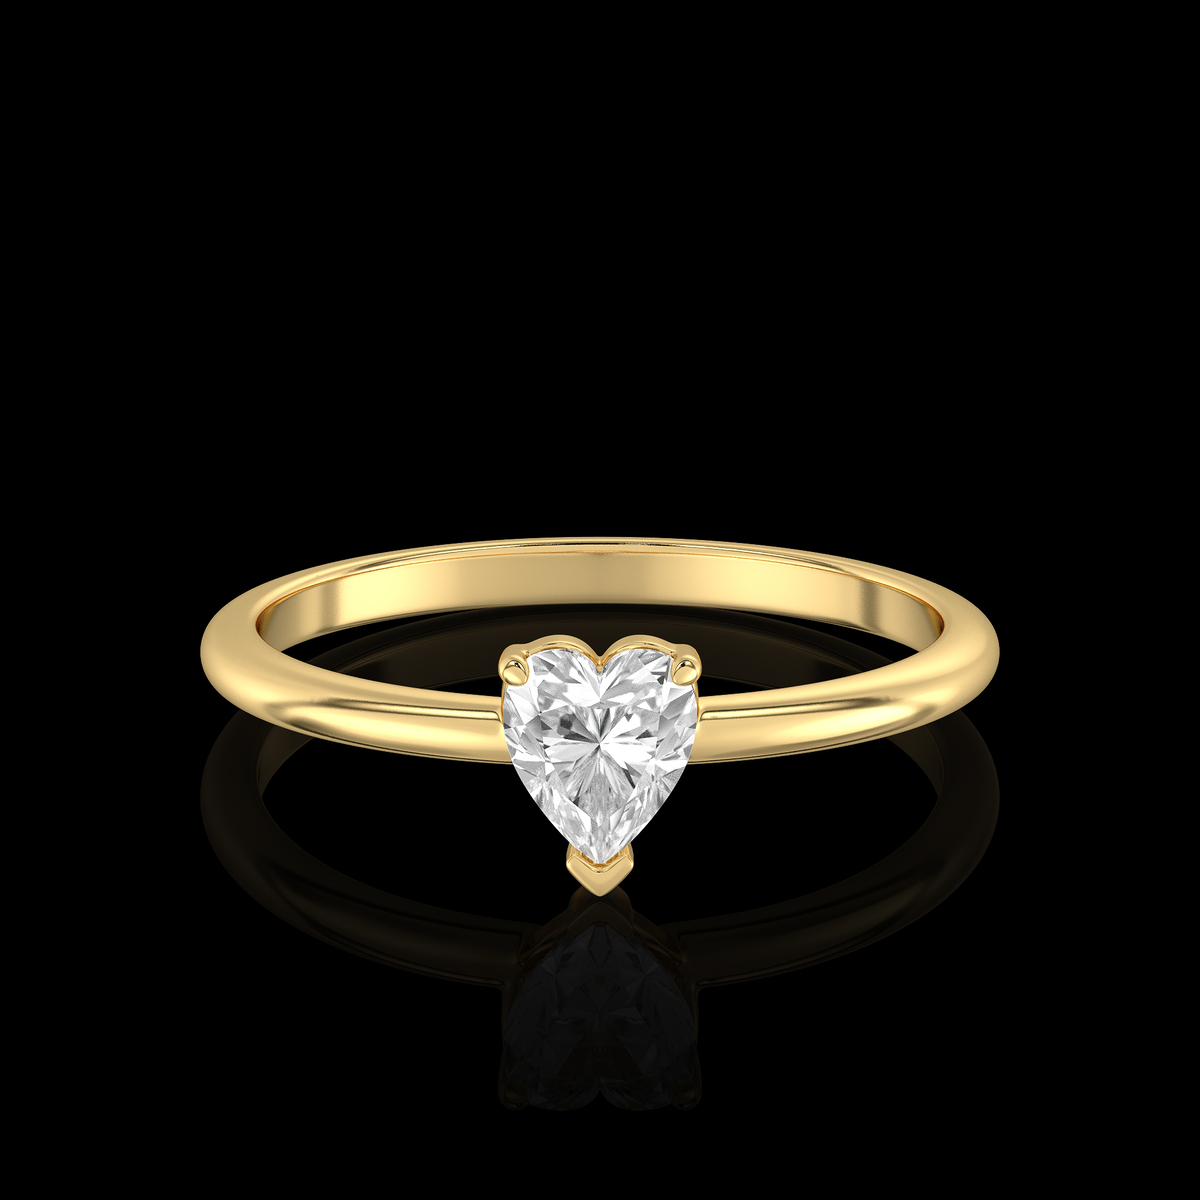 1 Carat Heart Shape Diamond Thin Classic Solitaire Engagement Ring In White  Gold | eBay